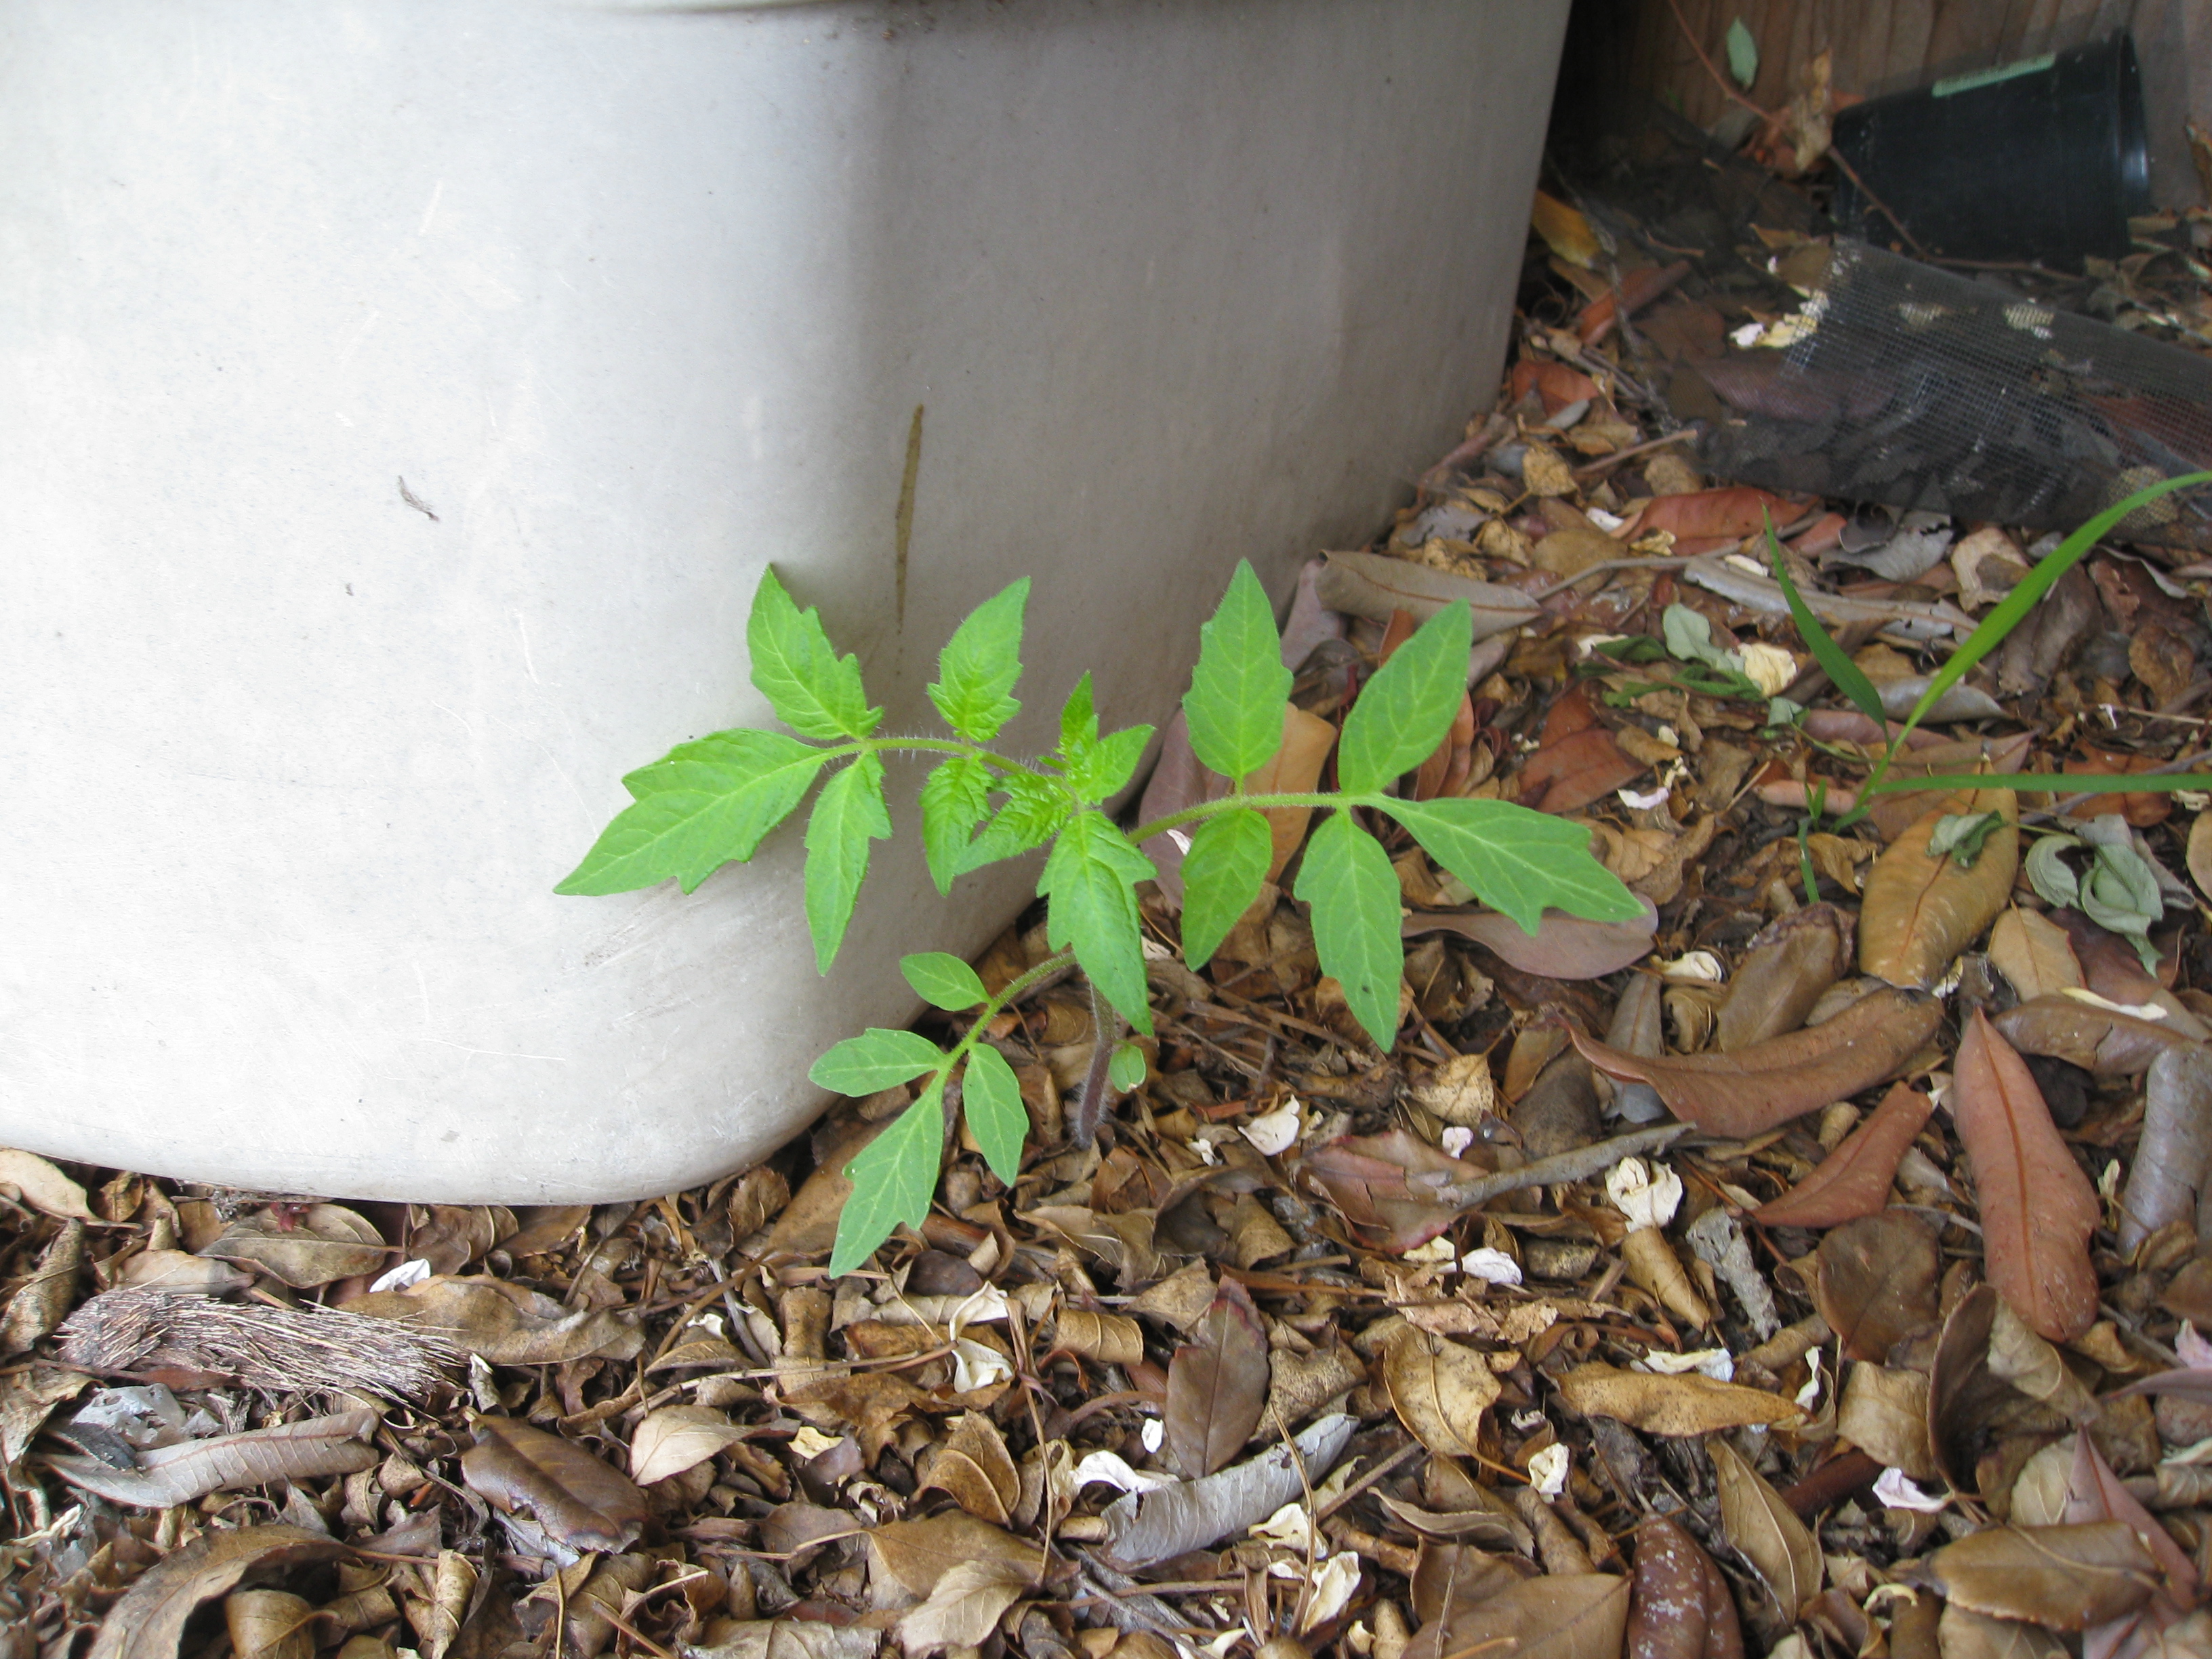 A volunteer tomato sprouted from under our compost storage tub.